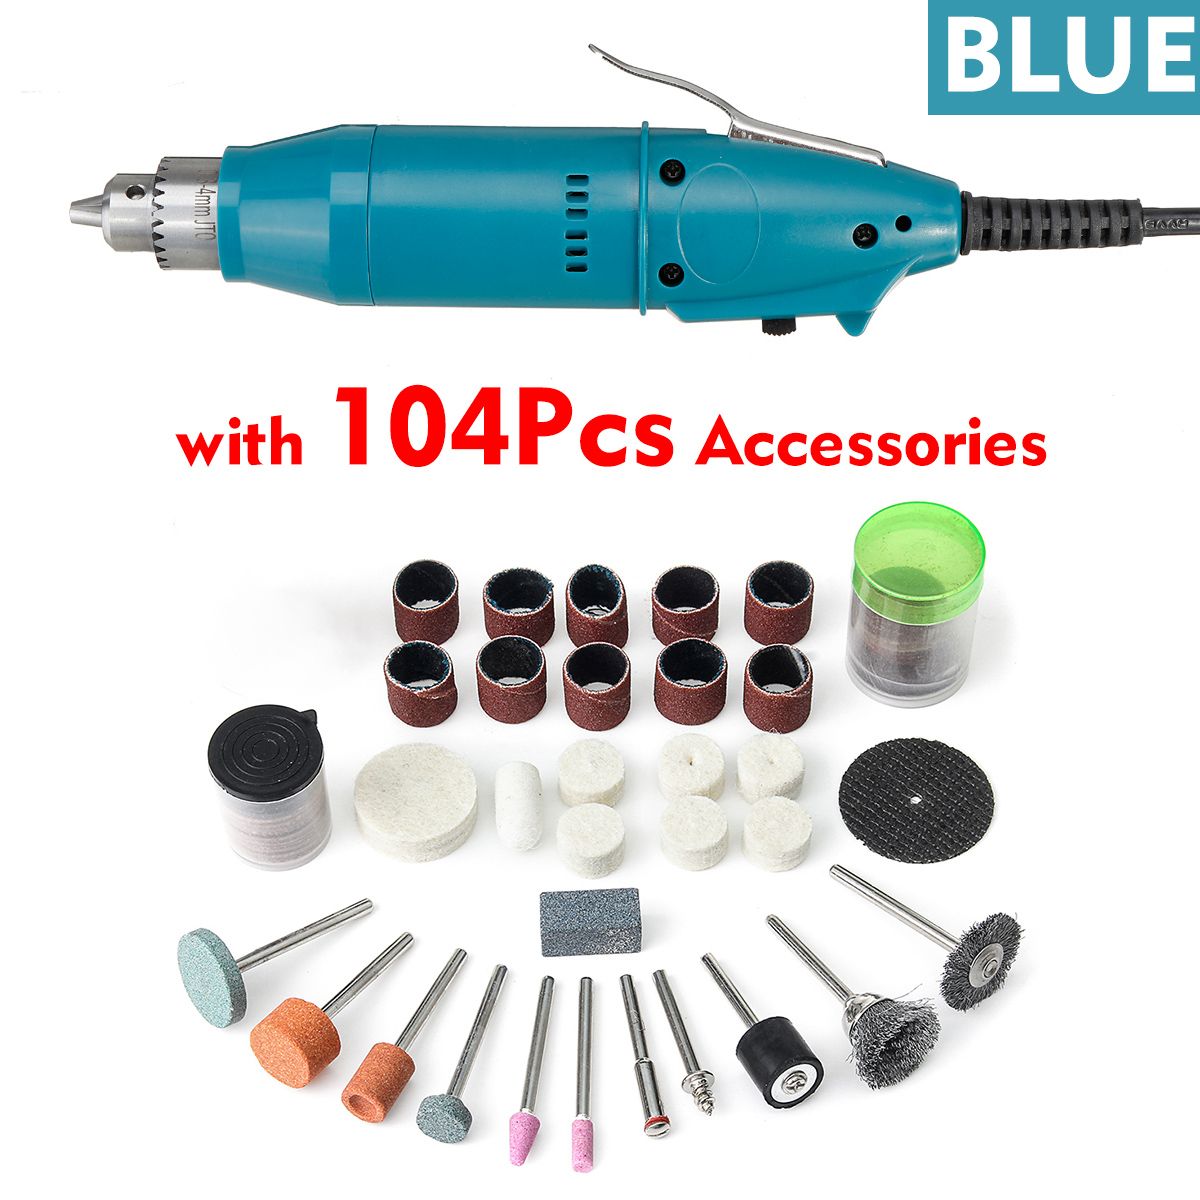 105Pcs-20000RPM-Electric-Grinder-Drill-Variable-Speed-Rotary-Power-Tools-Kit-1755850